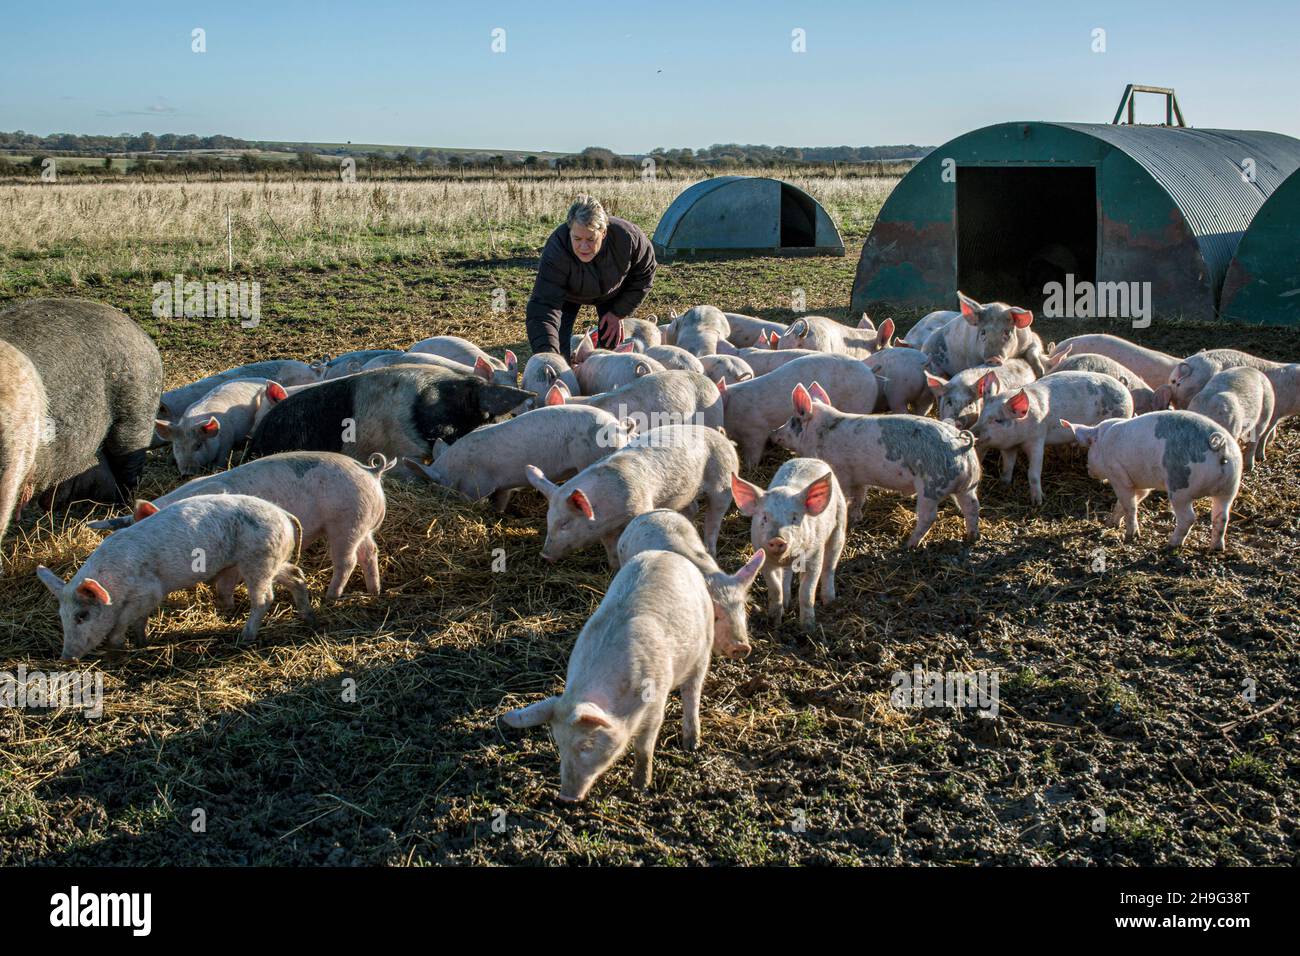 HELEN BROWNING Chief Executive of the Soil Association and organic pig farmer at the Eastbrook farm Bishopstone , UK Stock Photo